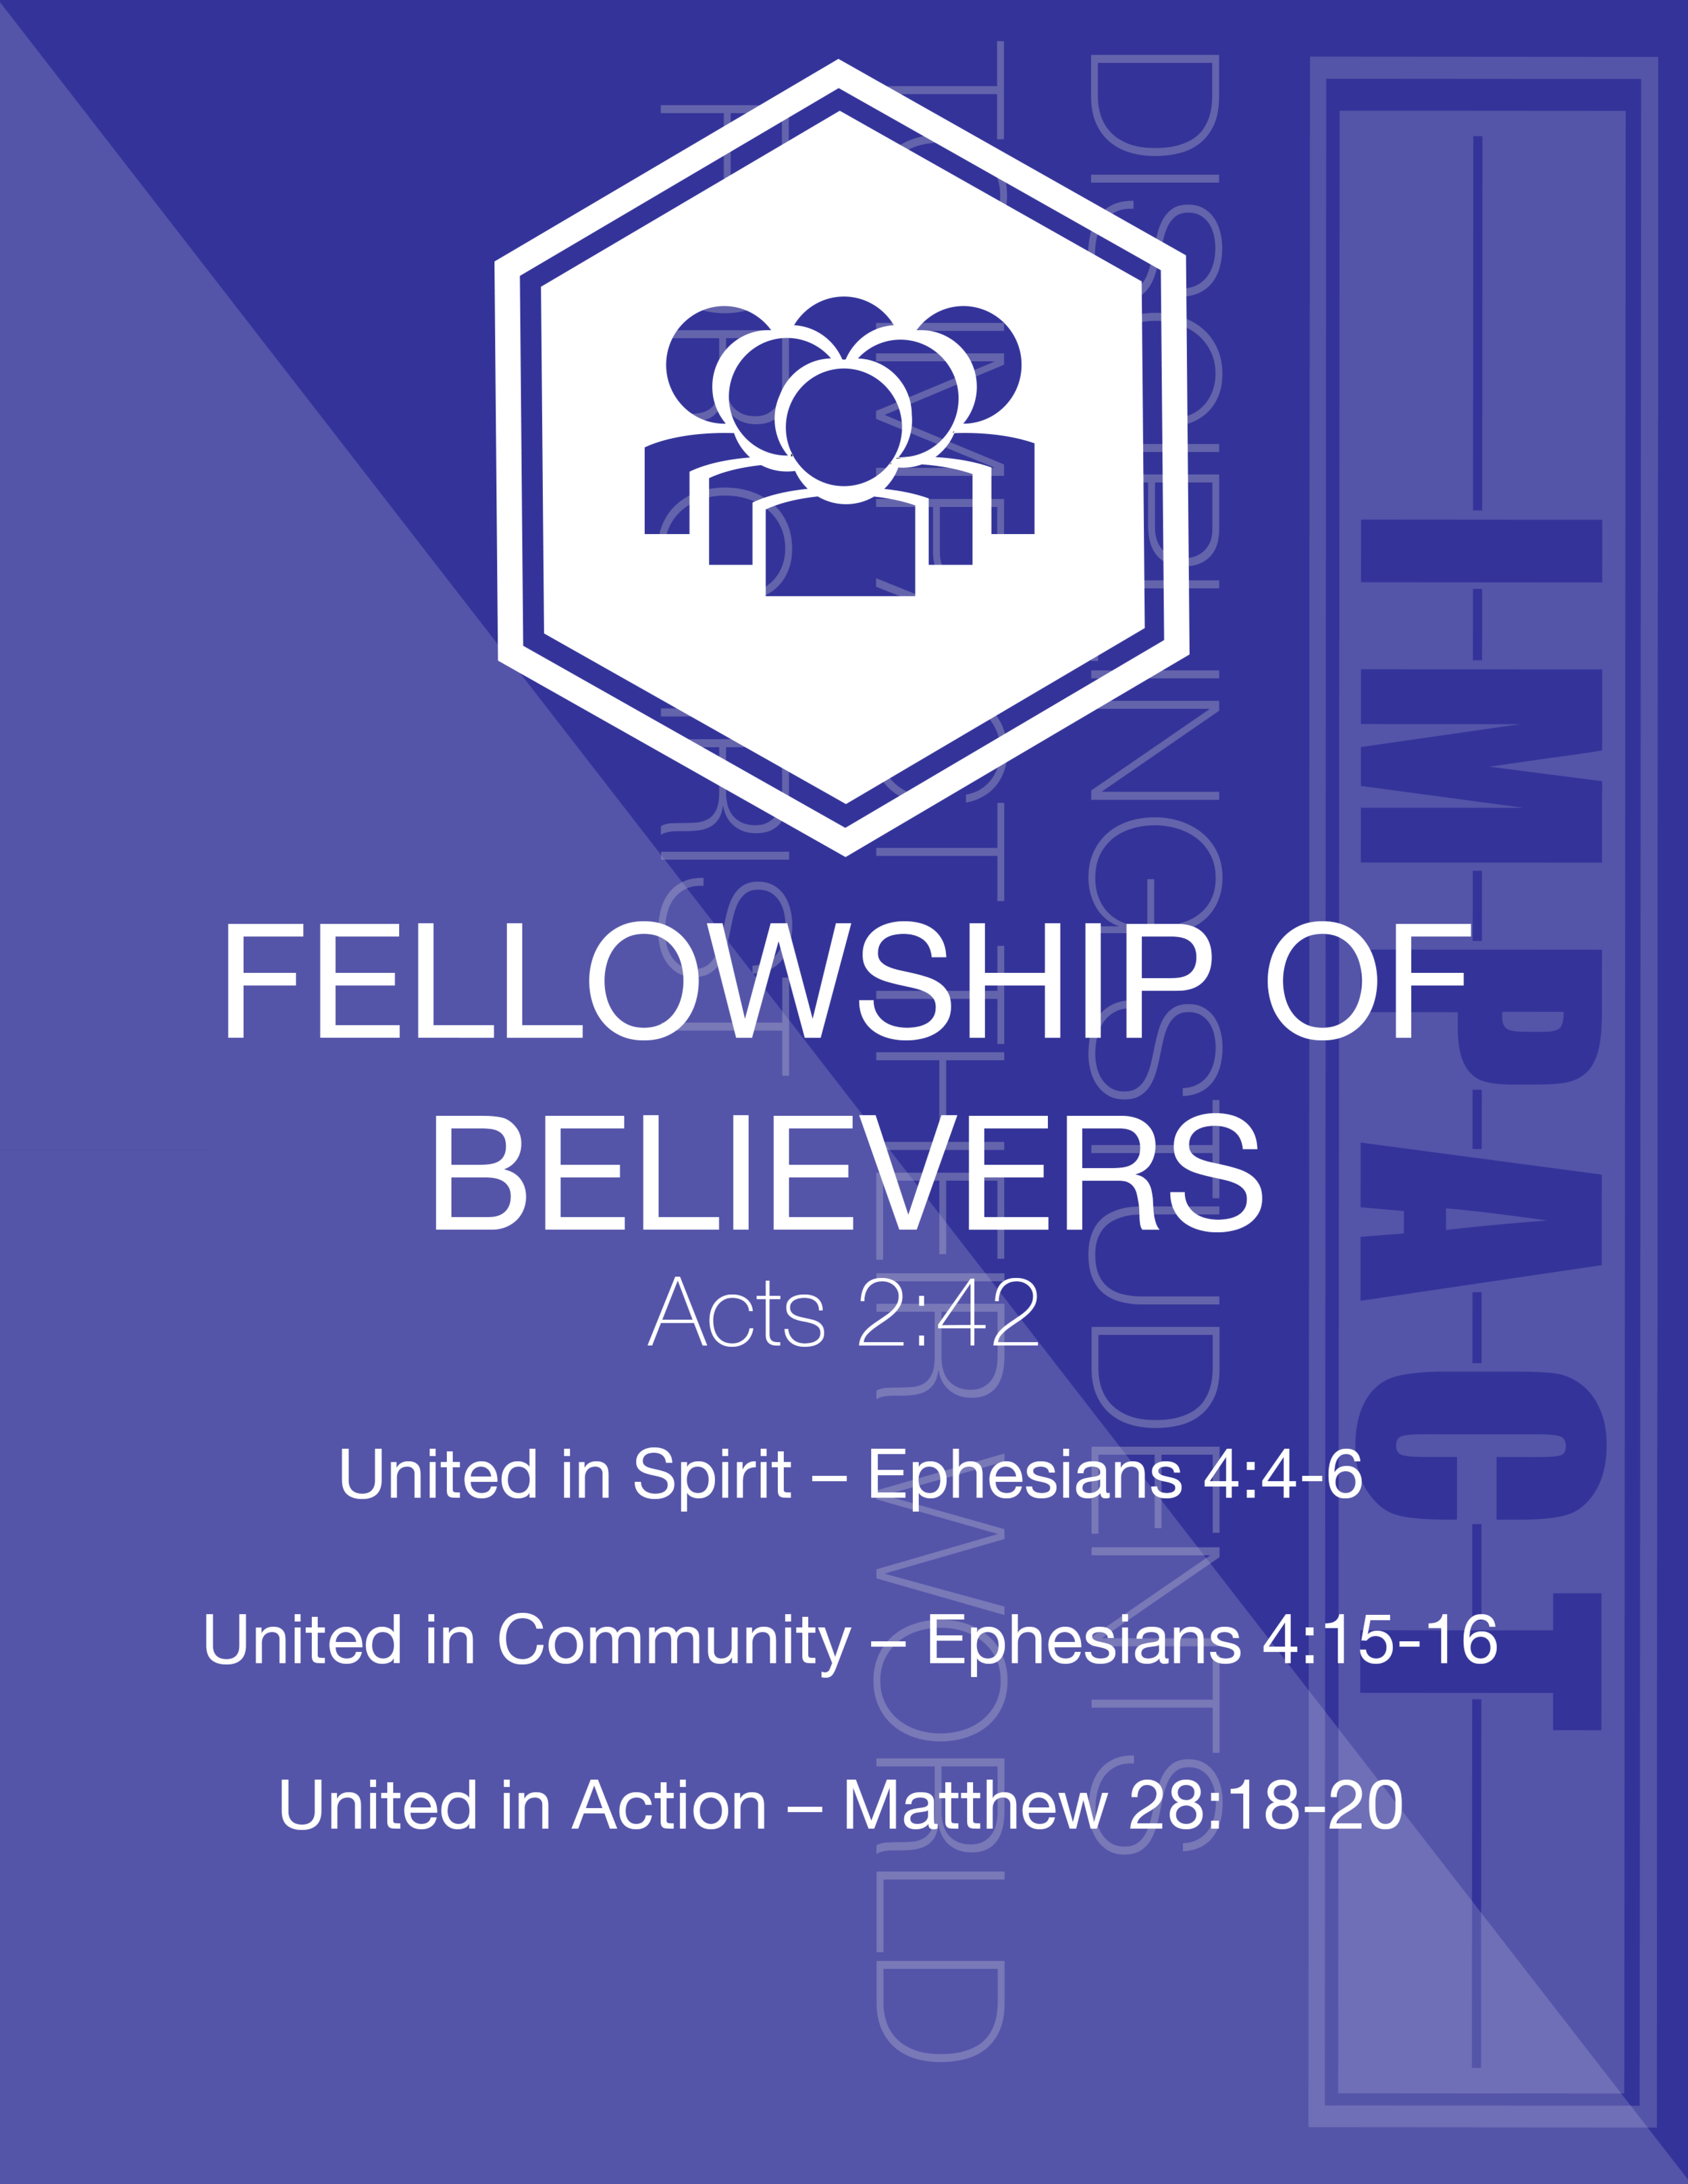 Fellowship of believers.PNG